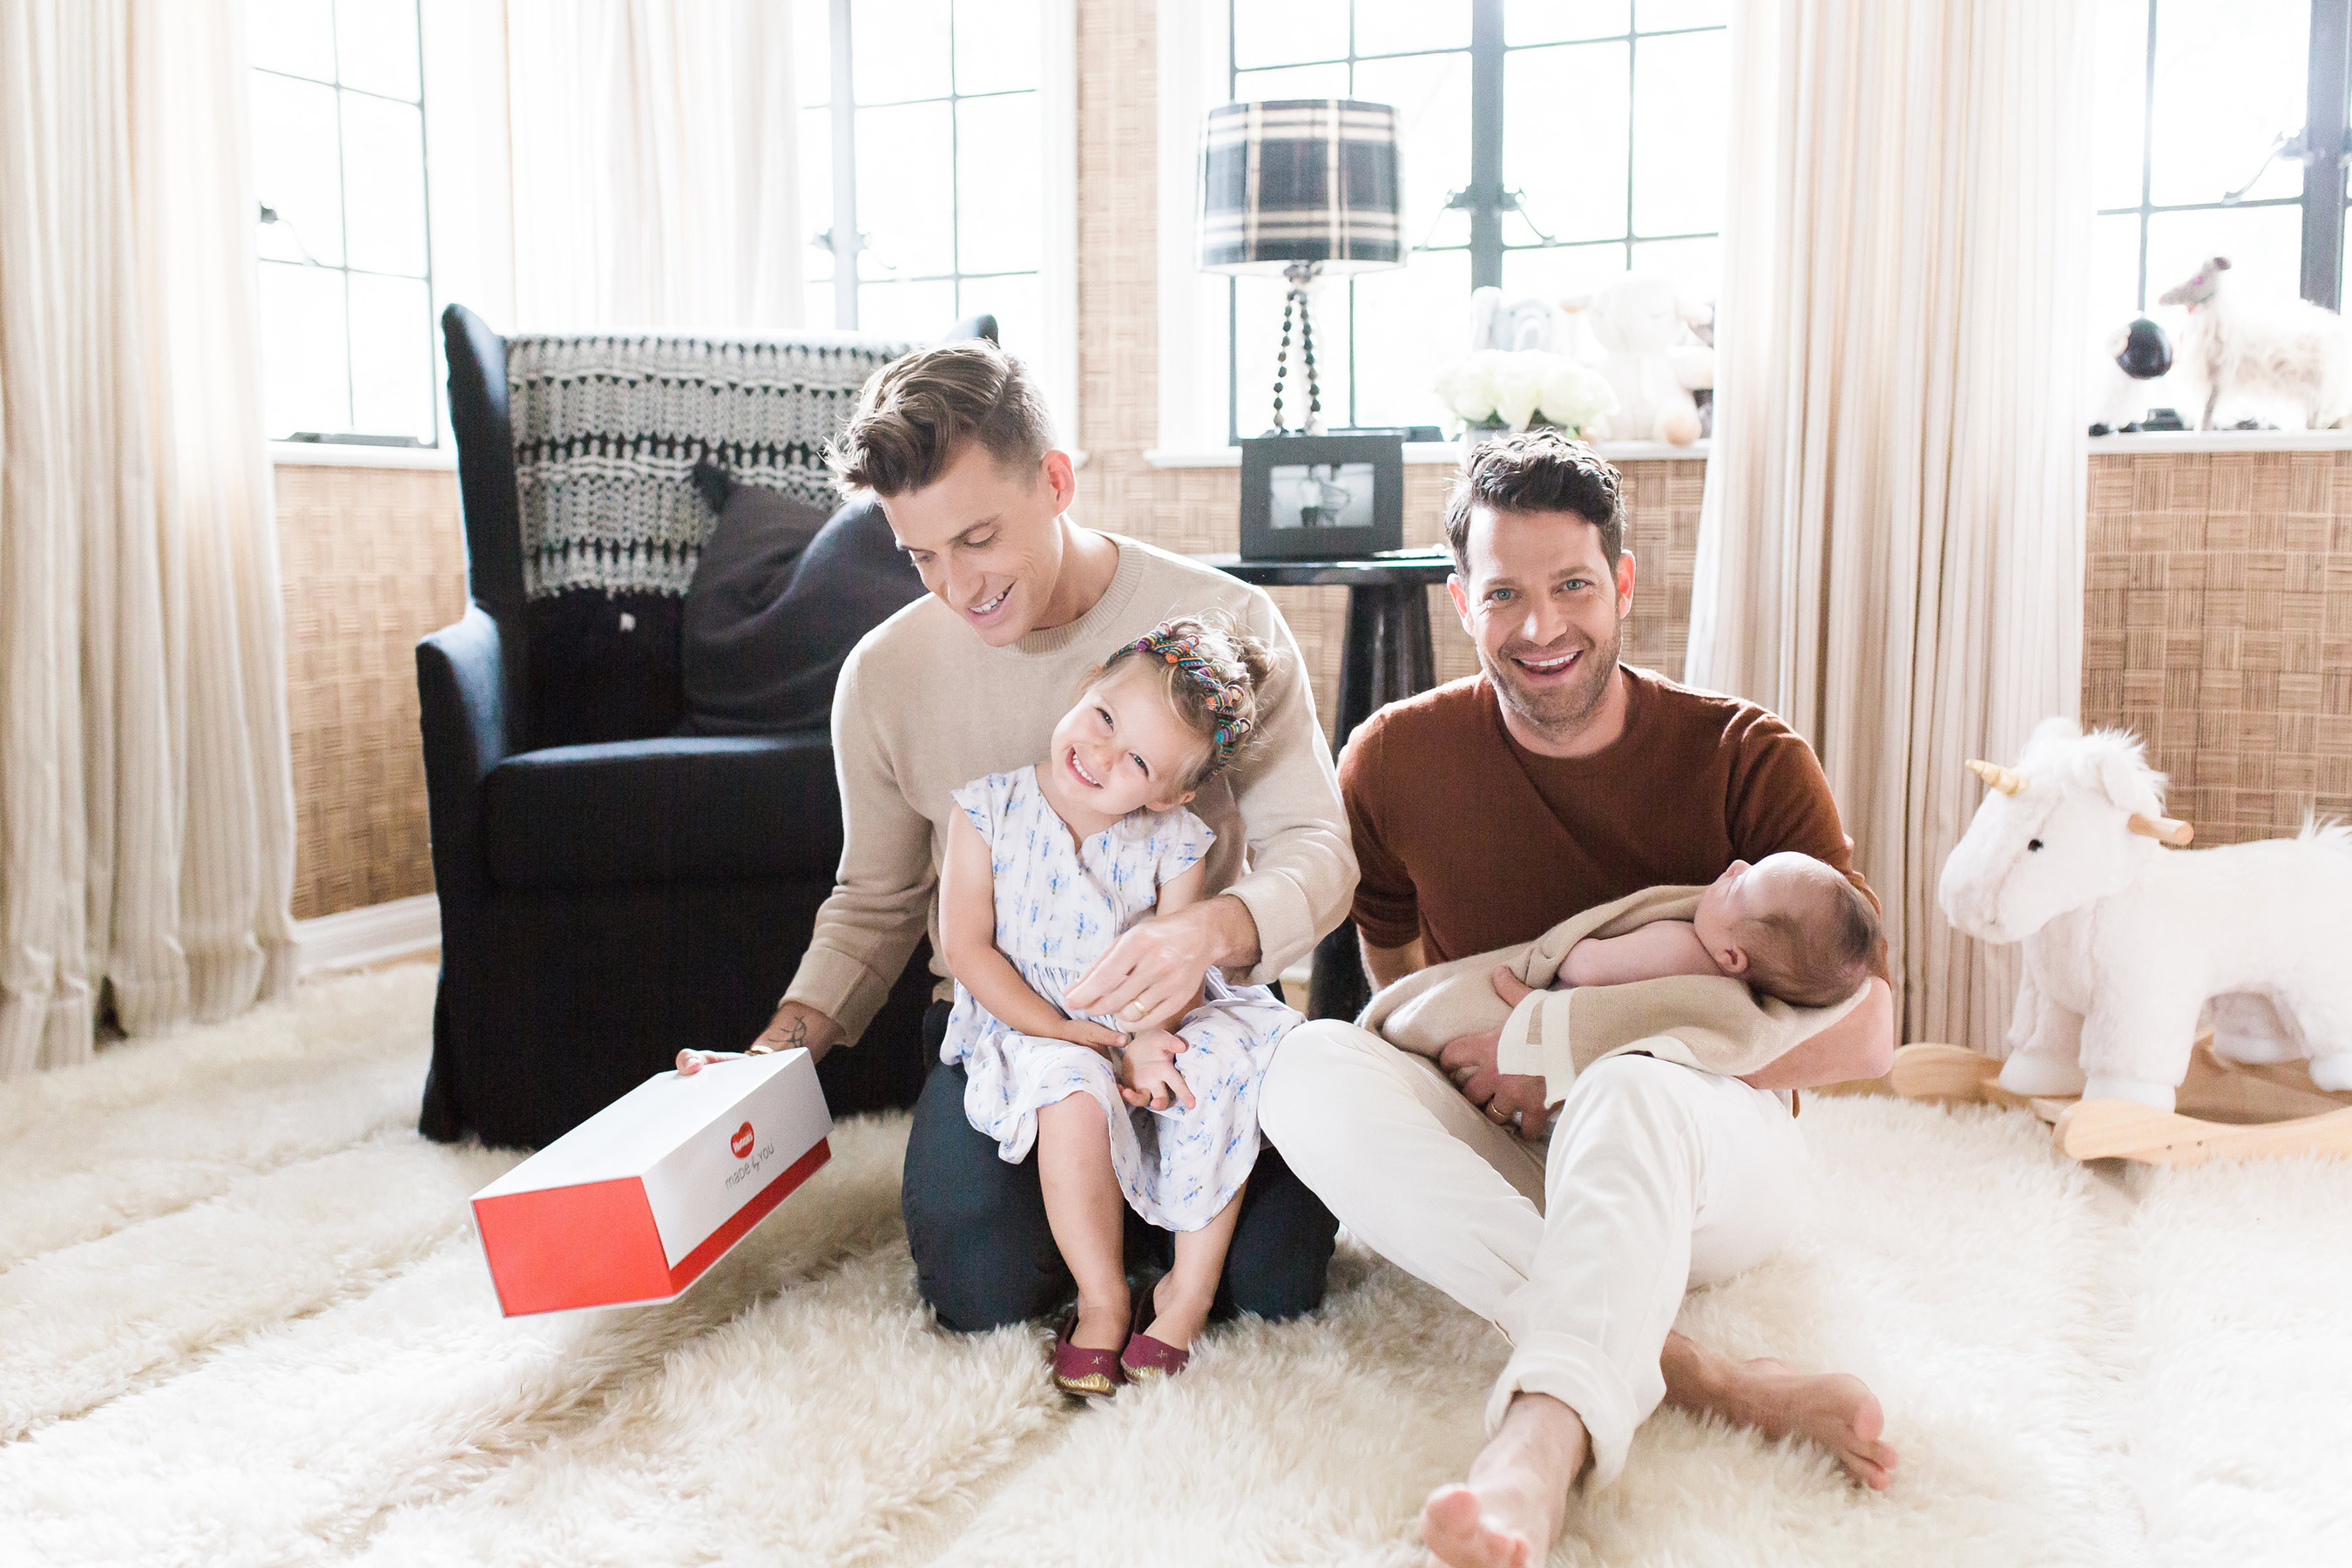 Nate Berkus, Jeremiah Brent and family team up with Huggies to launch Made by Youtm collection.